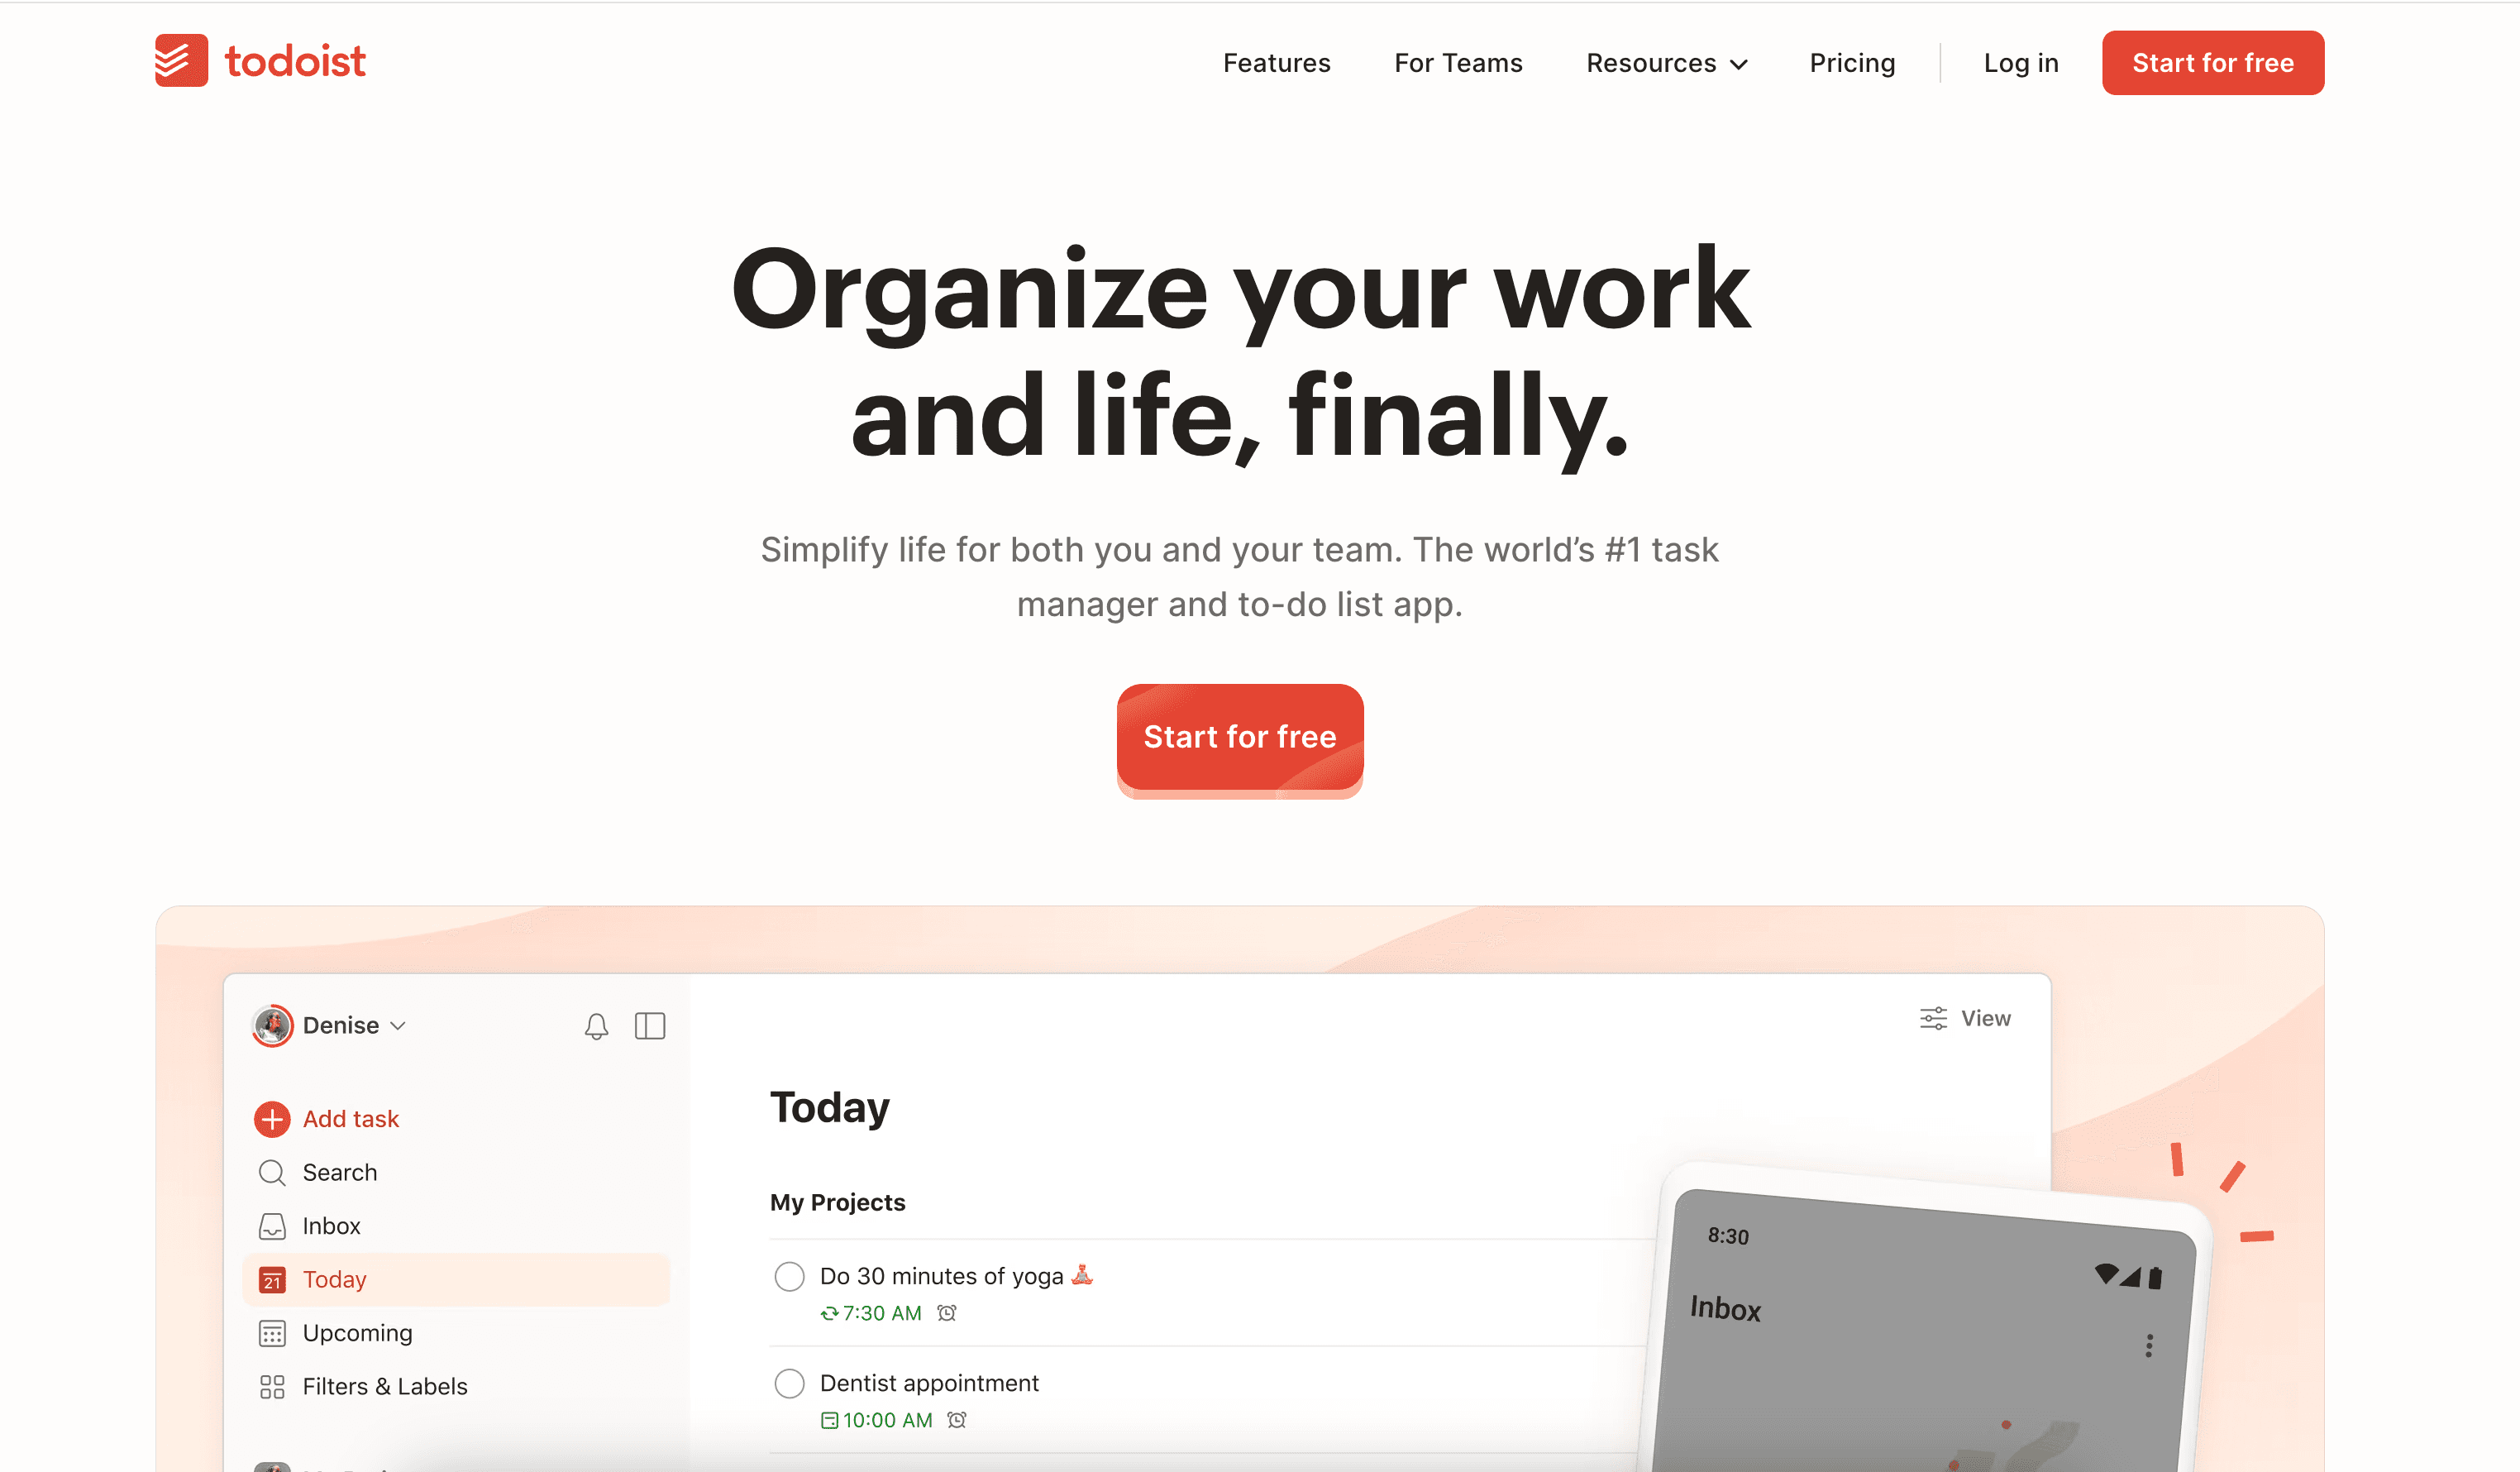 Todoist's website page "Organize your work and life, finally" as an example of Product Marketing Strategies